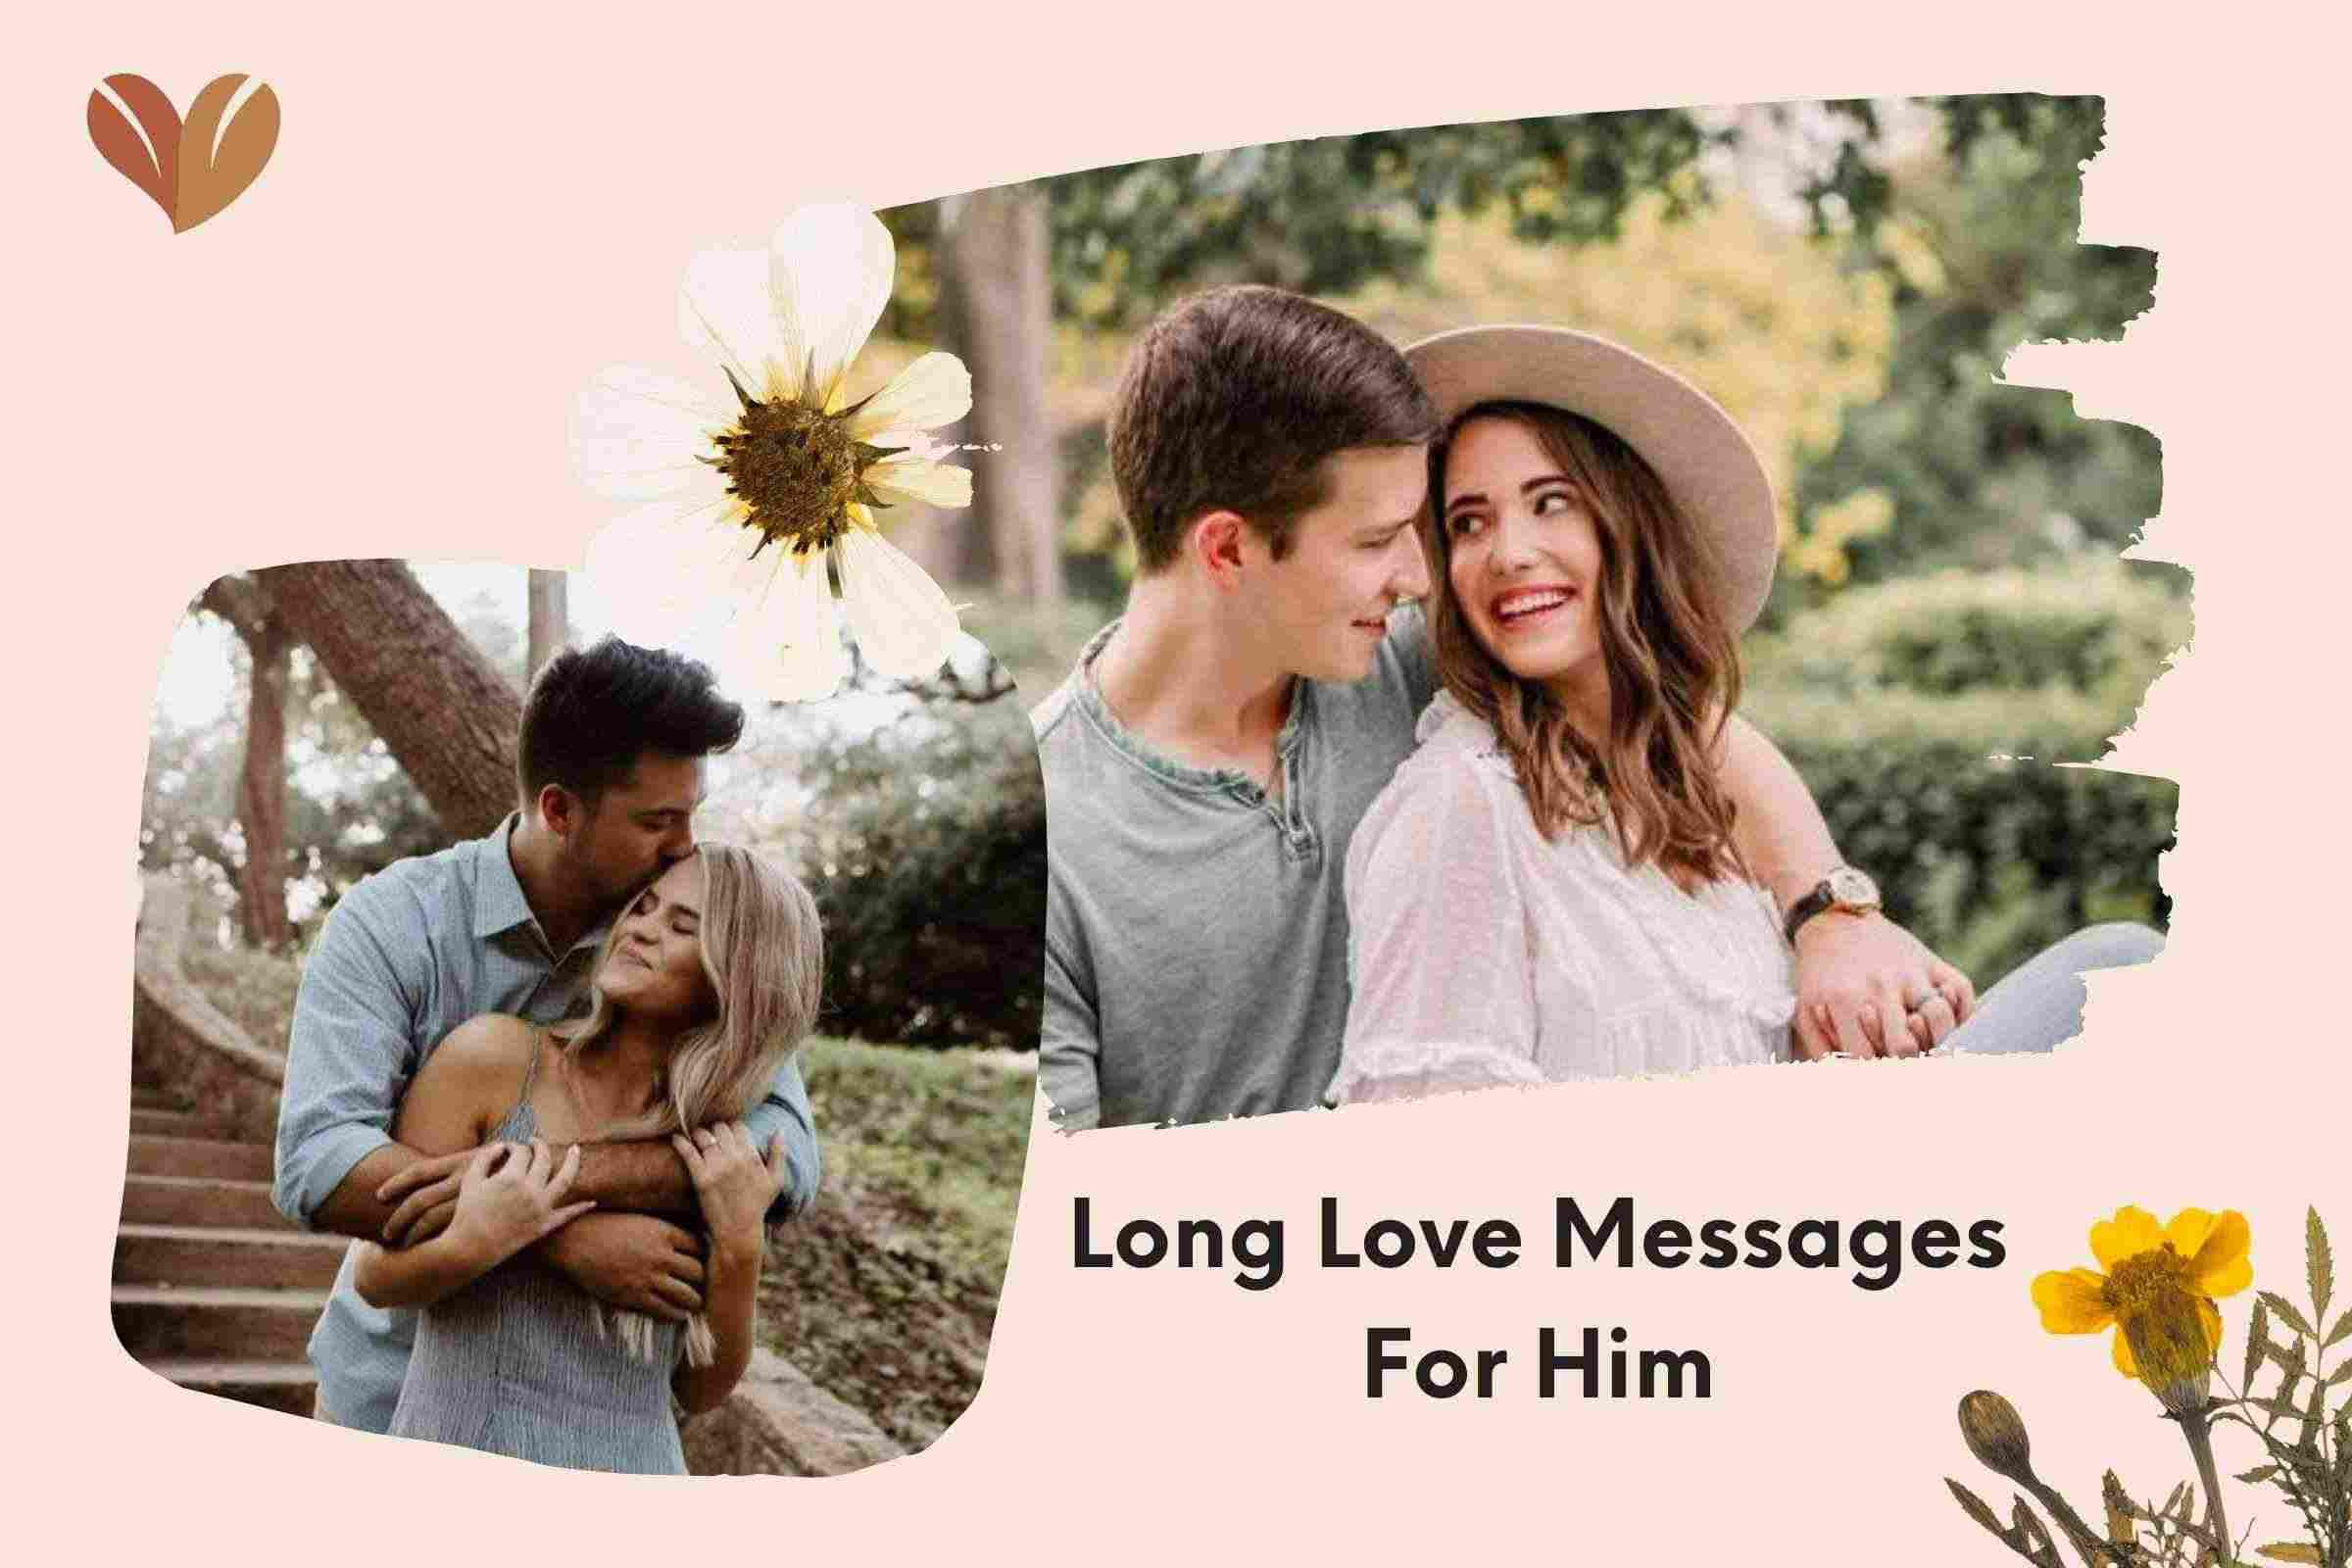 Long Love Messages For Him